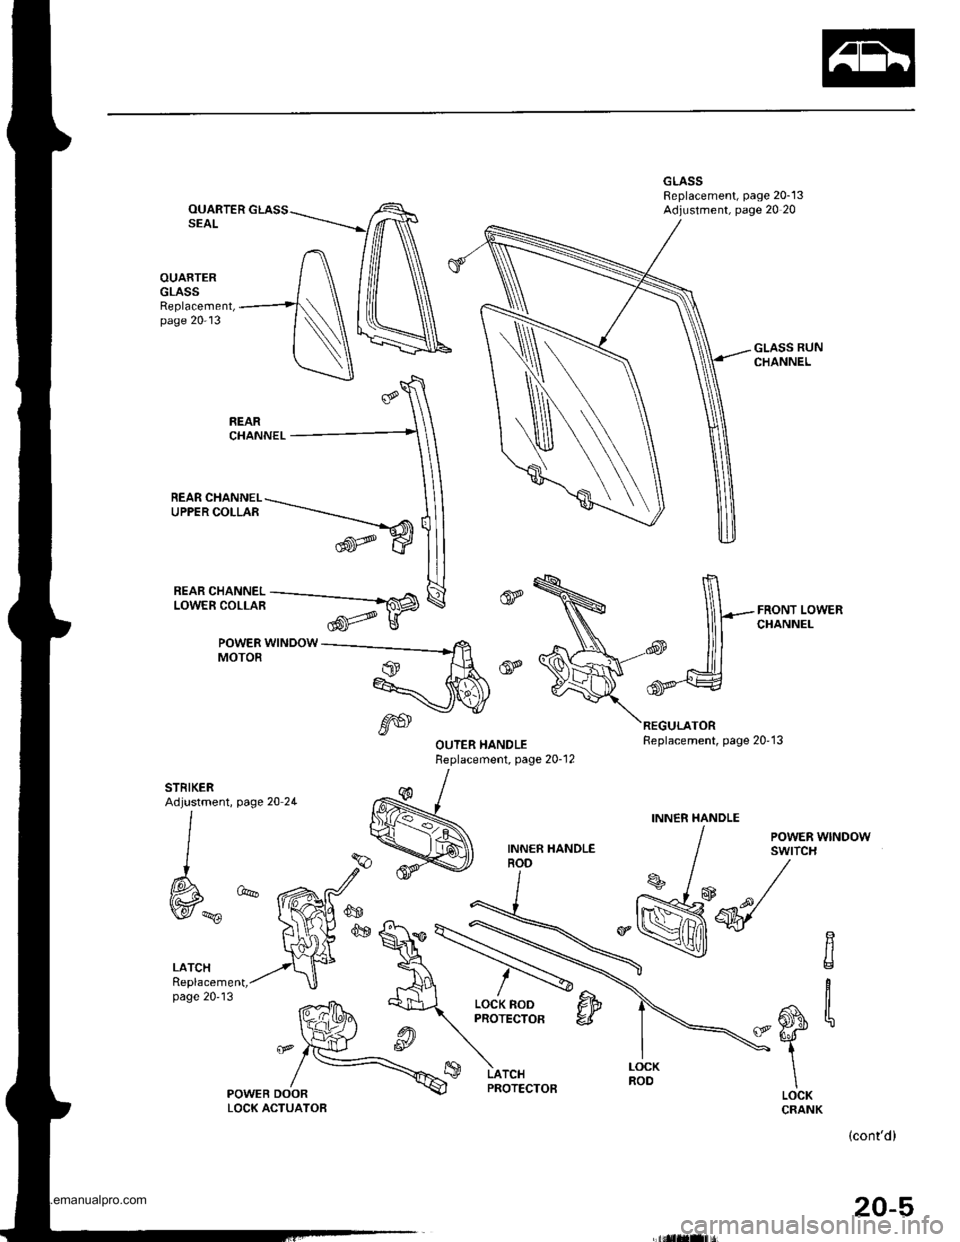 HONDA CR-V 1999 RD1-RD3 / 1.G Workshop Manual 
OUARTERSEAL
OUARTERGLASSReplacement,page 20-13
-flHiili^i--_Fffi
POWER WINDOWMOTOR
REAR CHANNEL-\UPPERCOLLAR -.-----_----_-""
trw
page 20 2L
LATCHReplacement,page 2013
POWEB DOORLOCK ACTUATOB
,6S
R